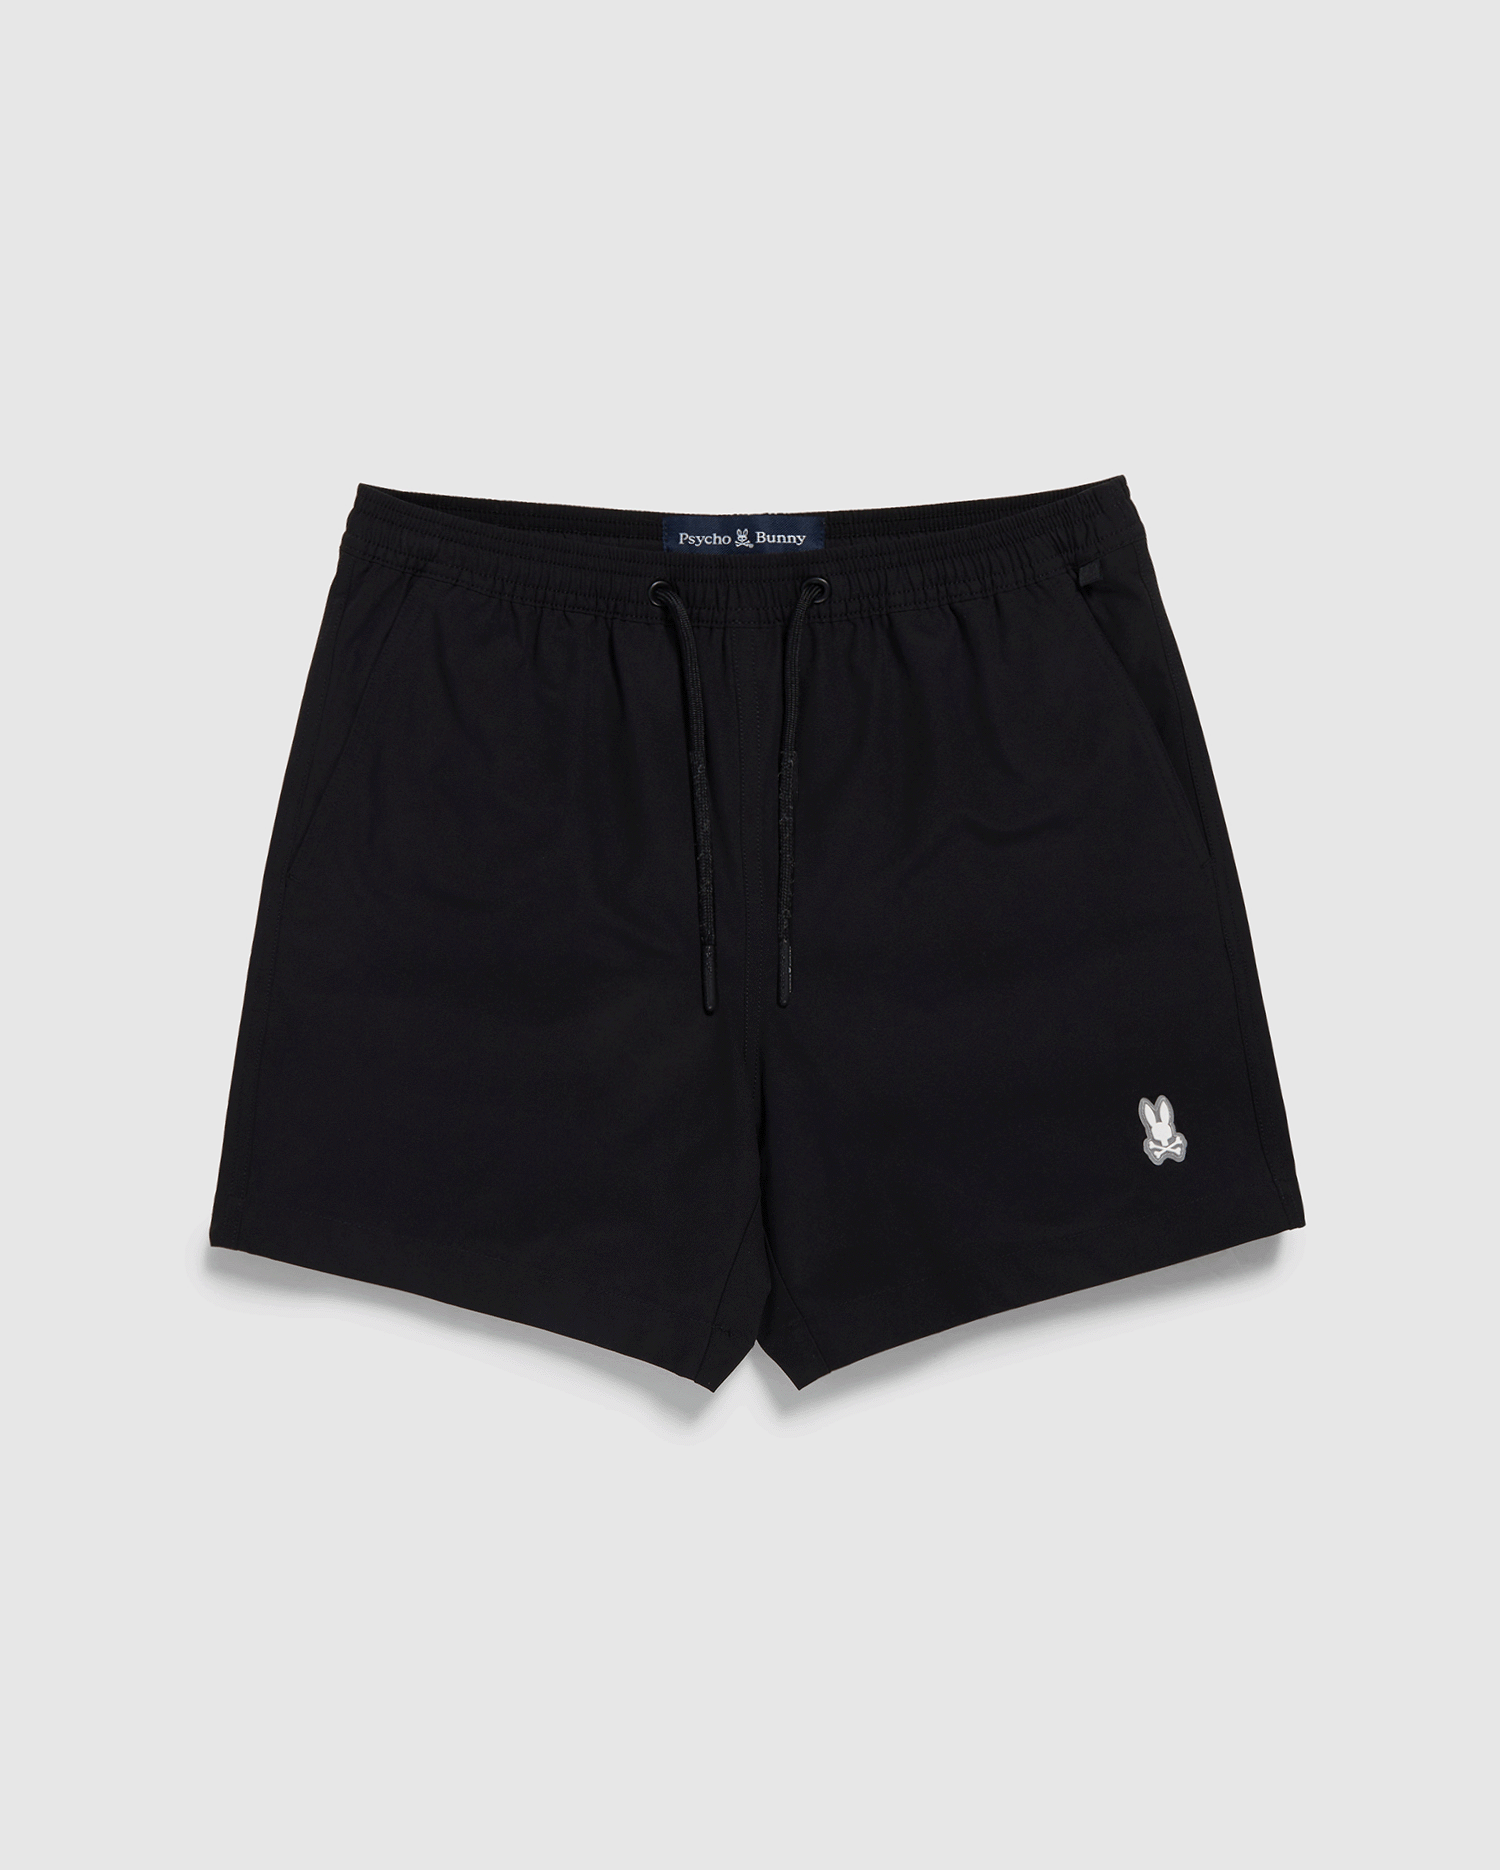 Black Psycho Bunny swim trunks with a drawstring and a small white logo on the left leg, displayed against a white backdrop. The label 